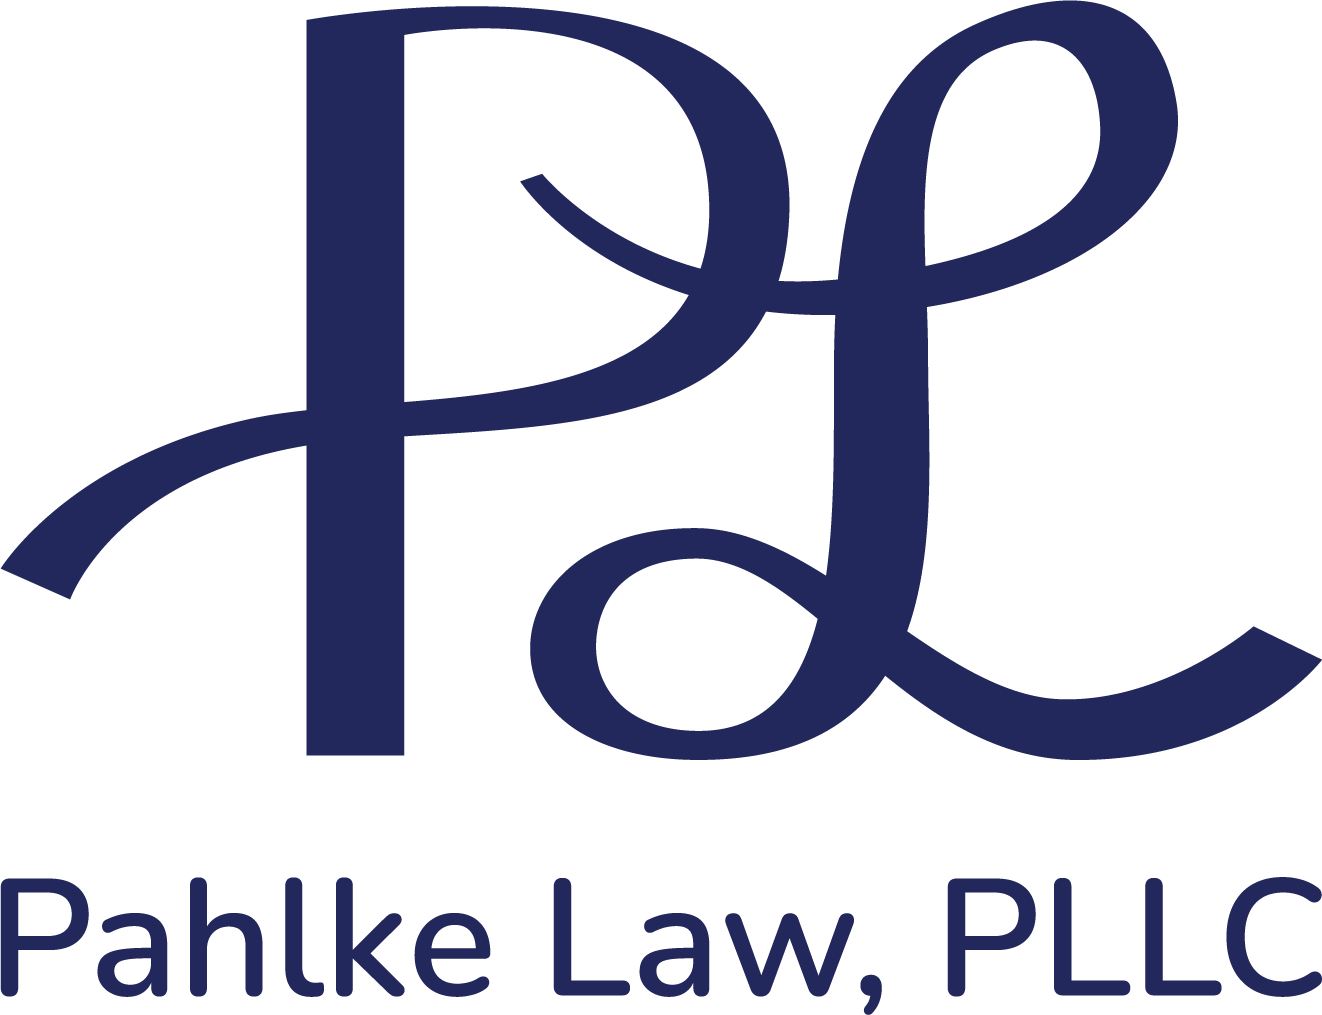 Paige Pahlke Law